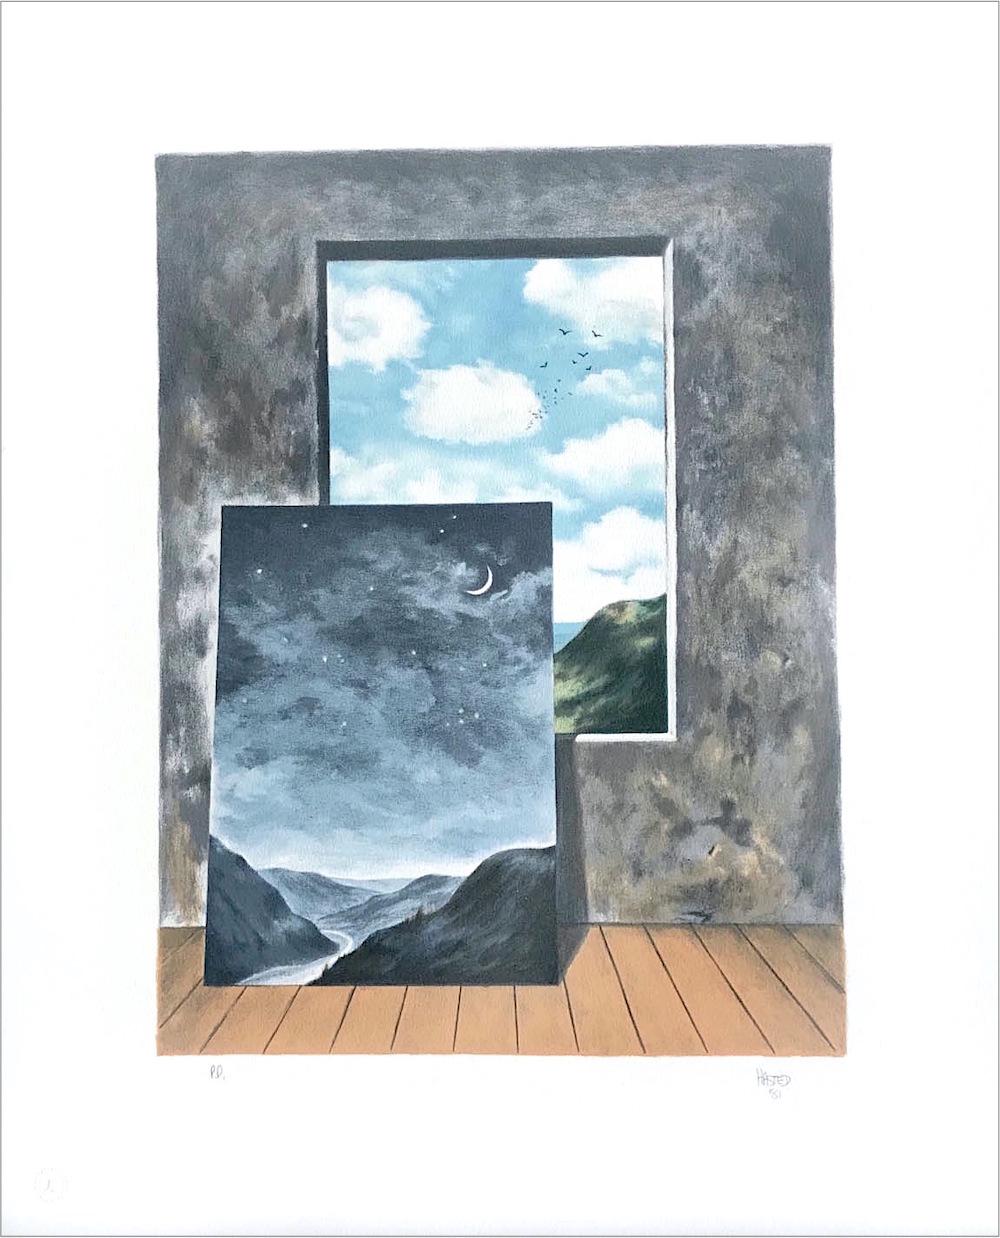 RANDOM SELECTION 2, Hand Drawn Lithograph, Surrealist Landscape, Window View - Print by Michael Hasted